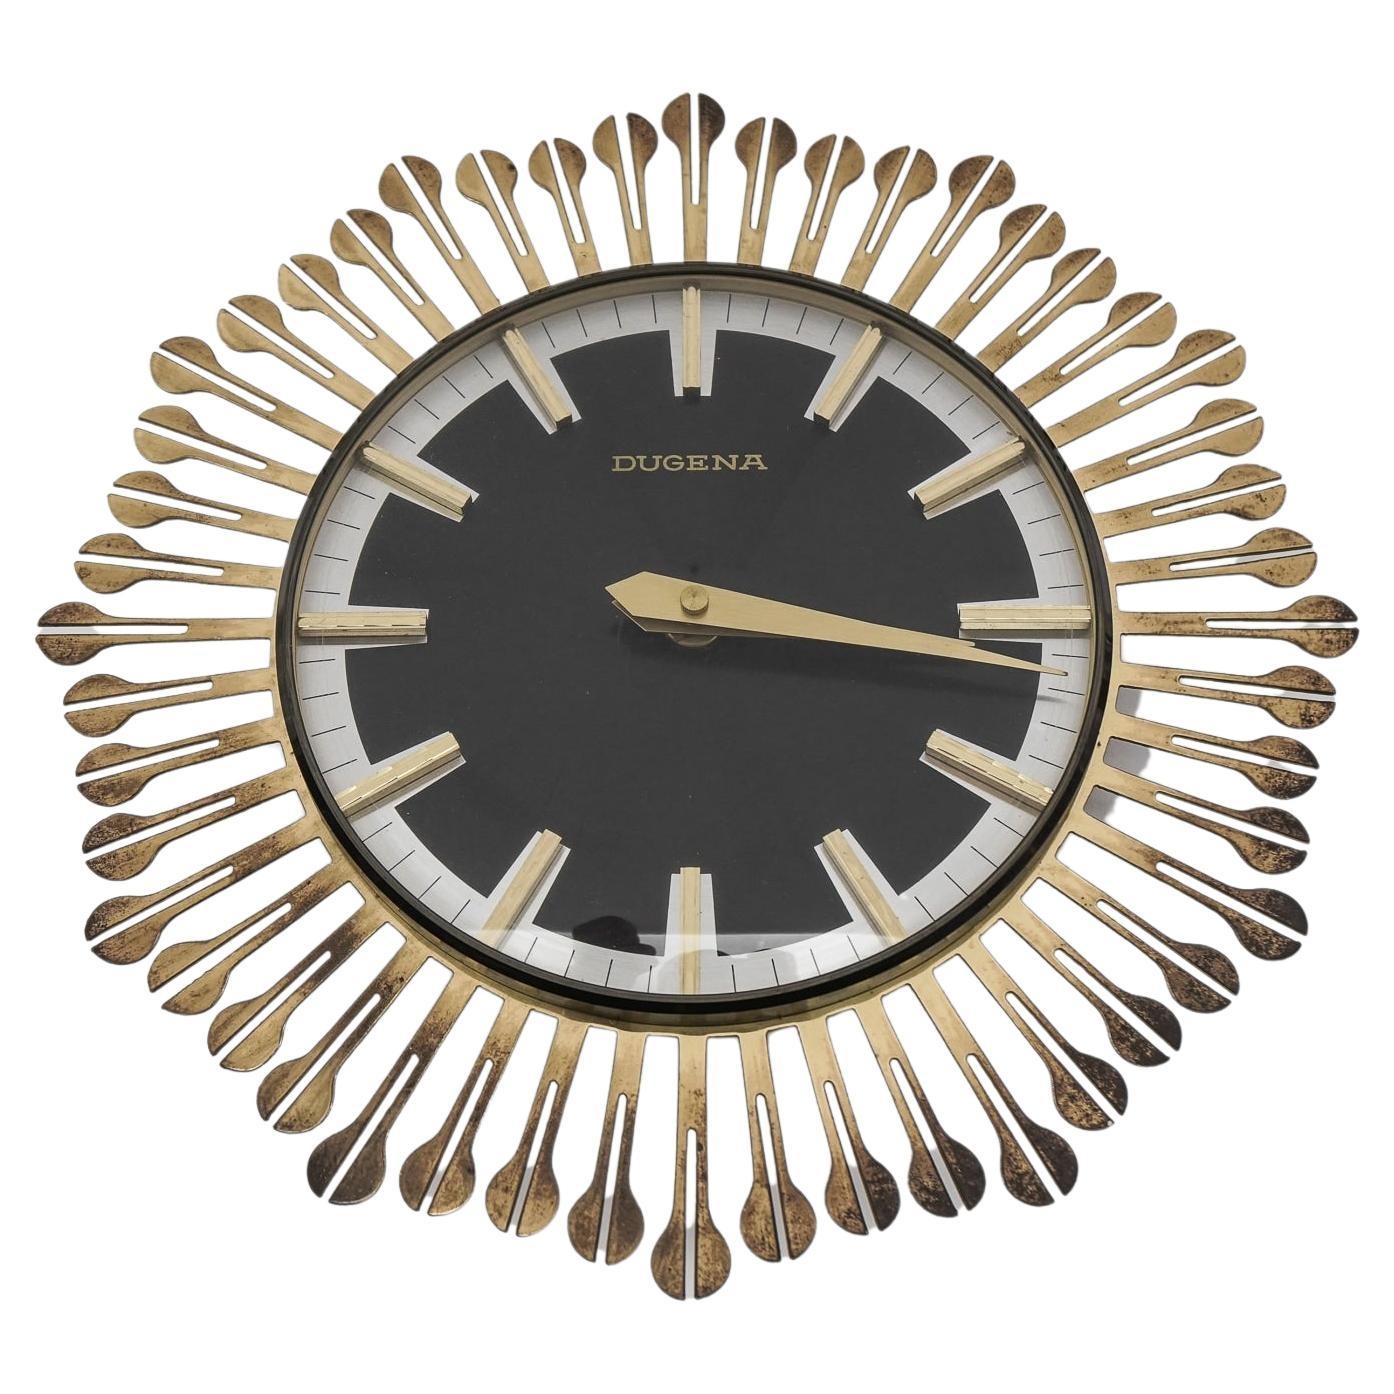 Mid-Century Modern Sunburst Wall Clock by Dugena in Brass, 1960s, Germany For Sale